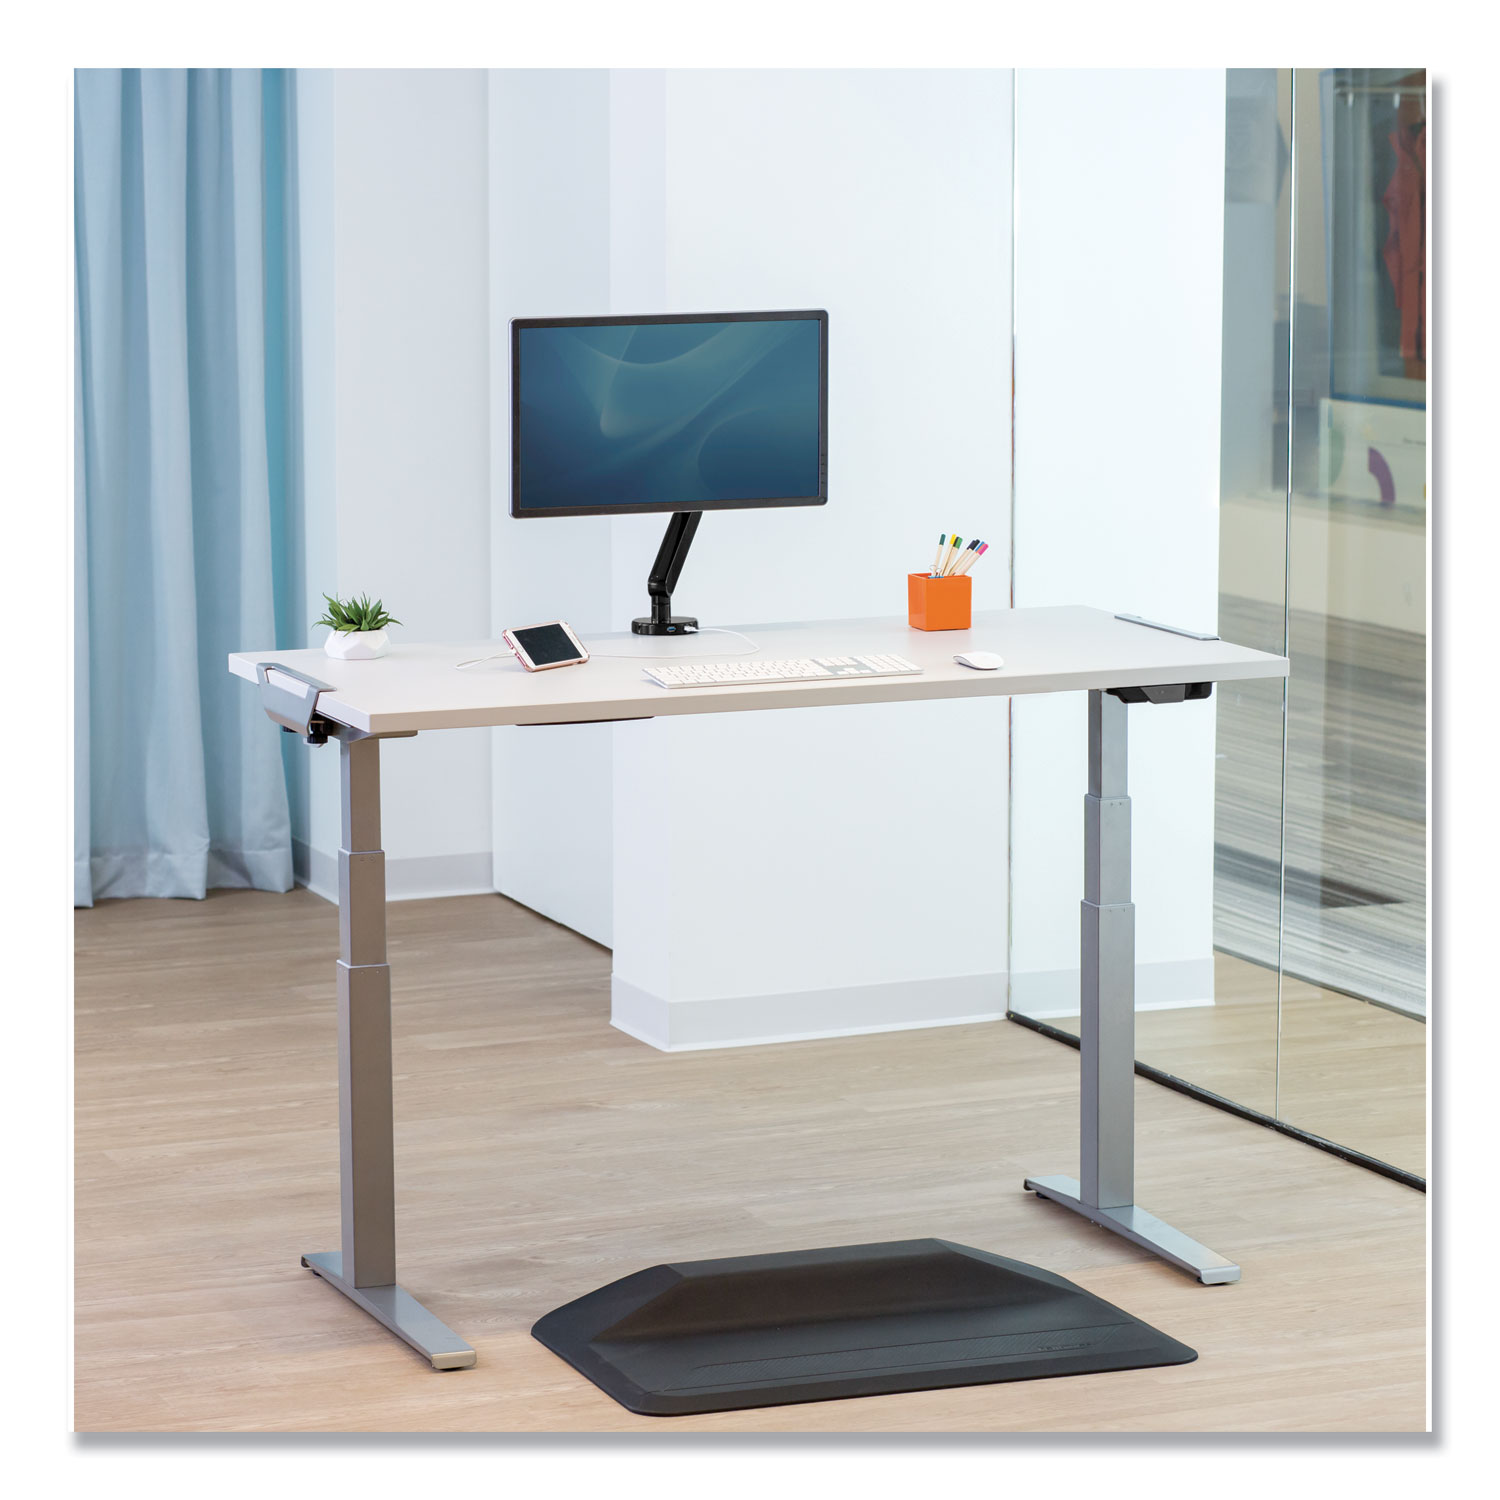  Fellowes 9650201 Levado Laminate Table Top (Top Only), 72w x 30d, Gray Ash (FEL9650201) 